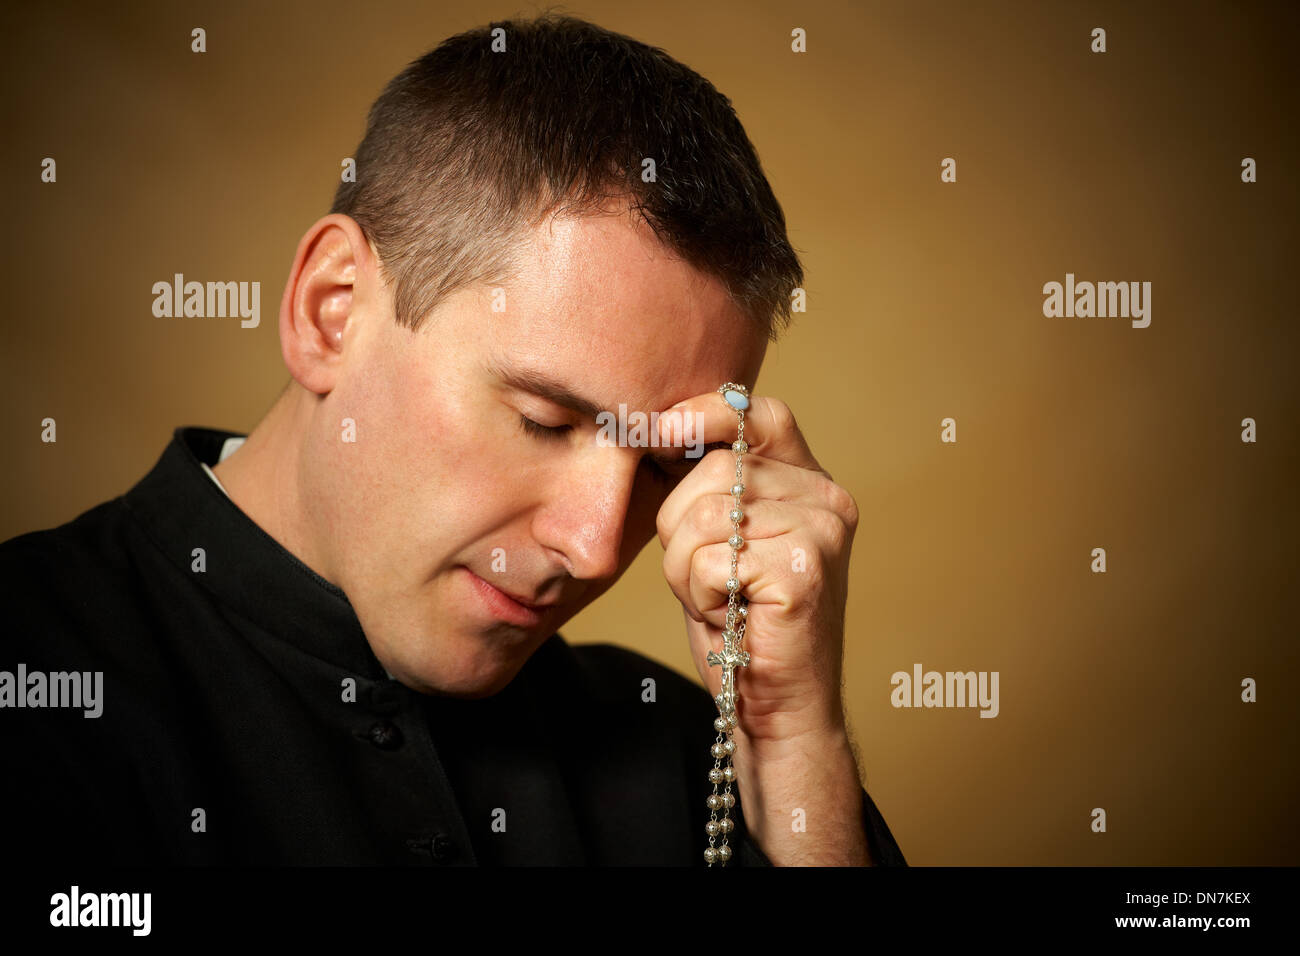 Praying priest with rosary in his hands Stock Photo - Alamy